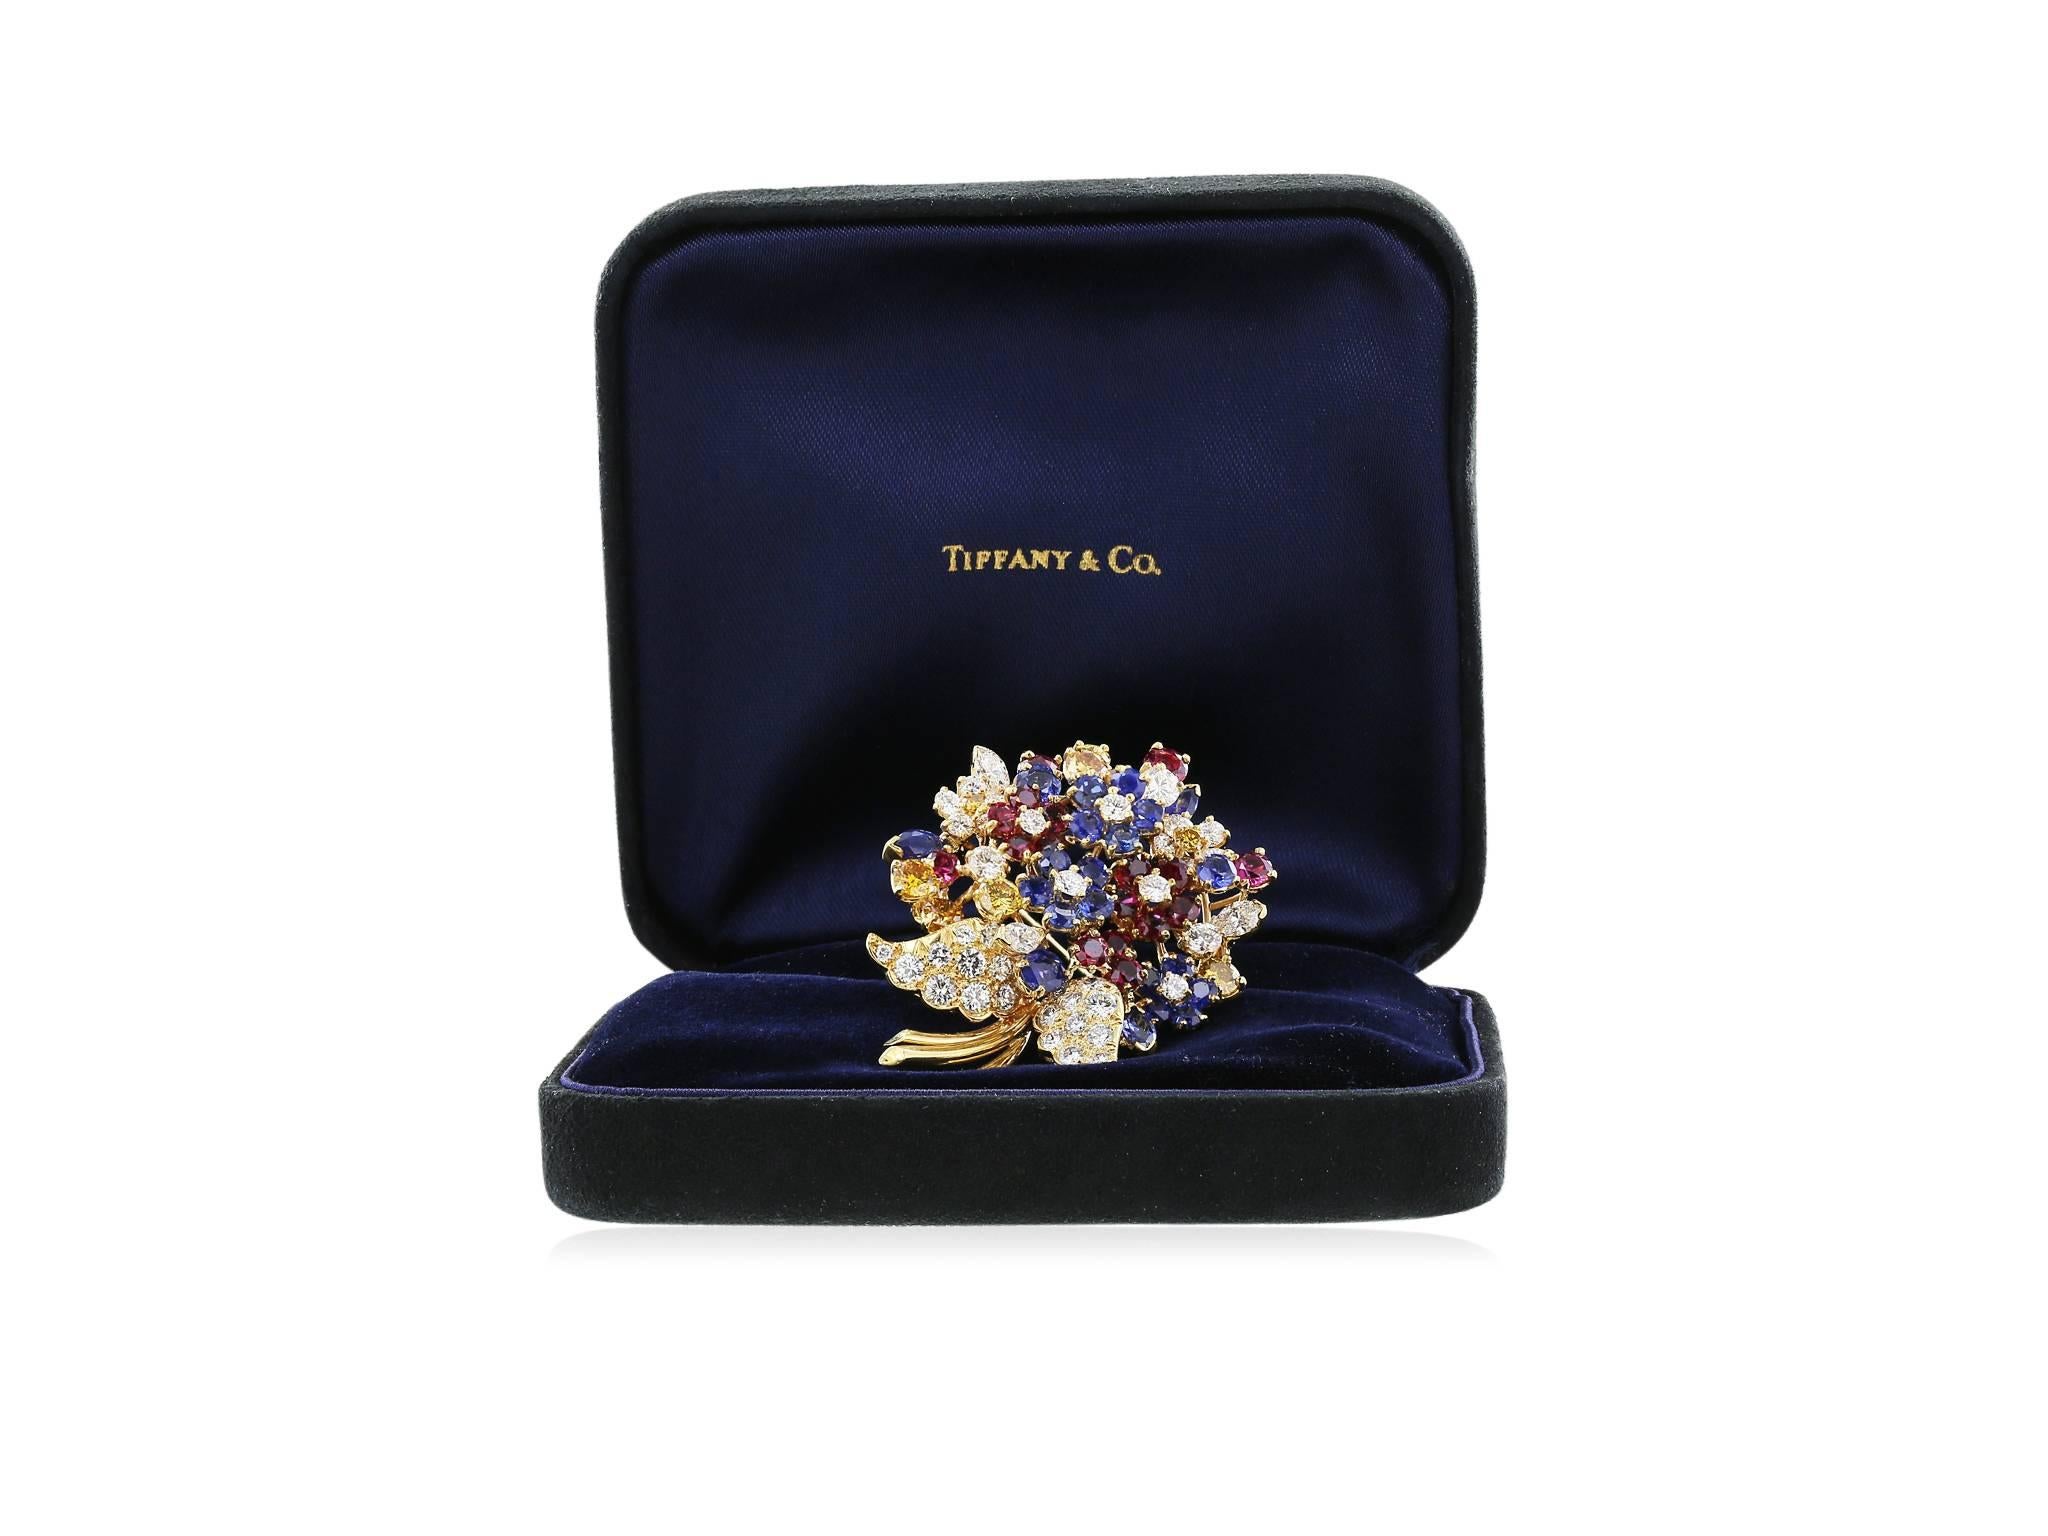 !8 karat yellow gold multi gem floral love knot pin consisting of diamonds, rubies, sapphires and canary diamonds, with a total approximate weight of 14 carats, signed, Tiffany & Co. with original box.